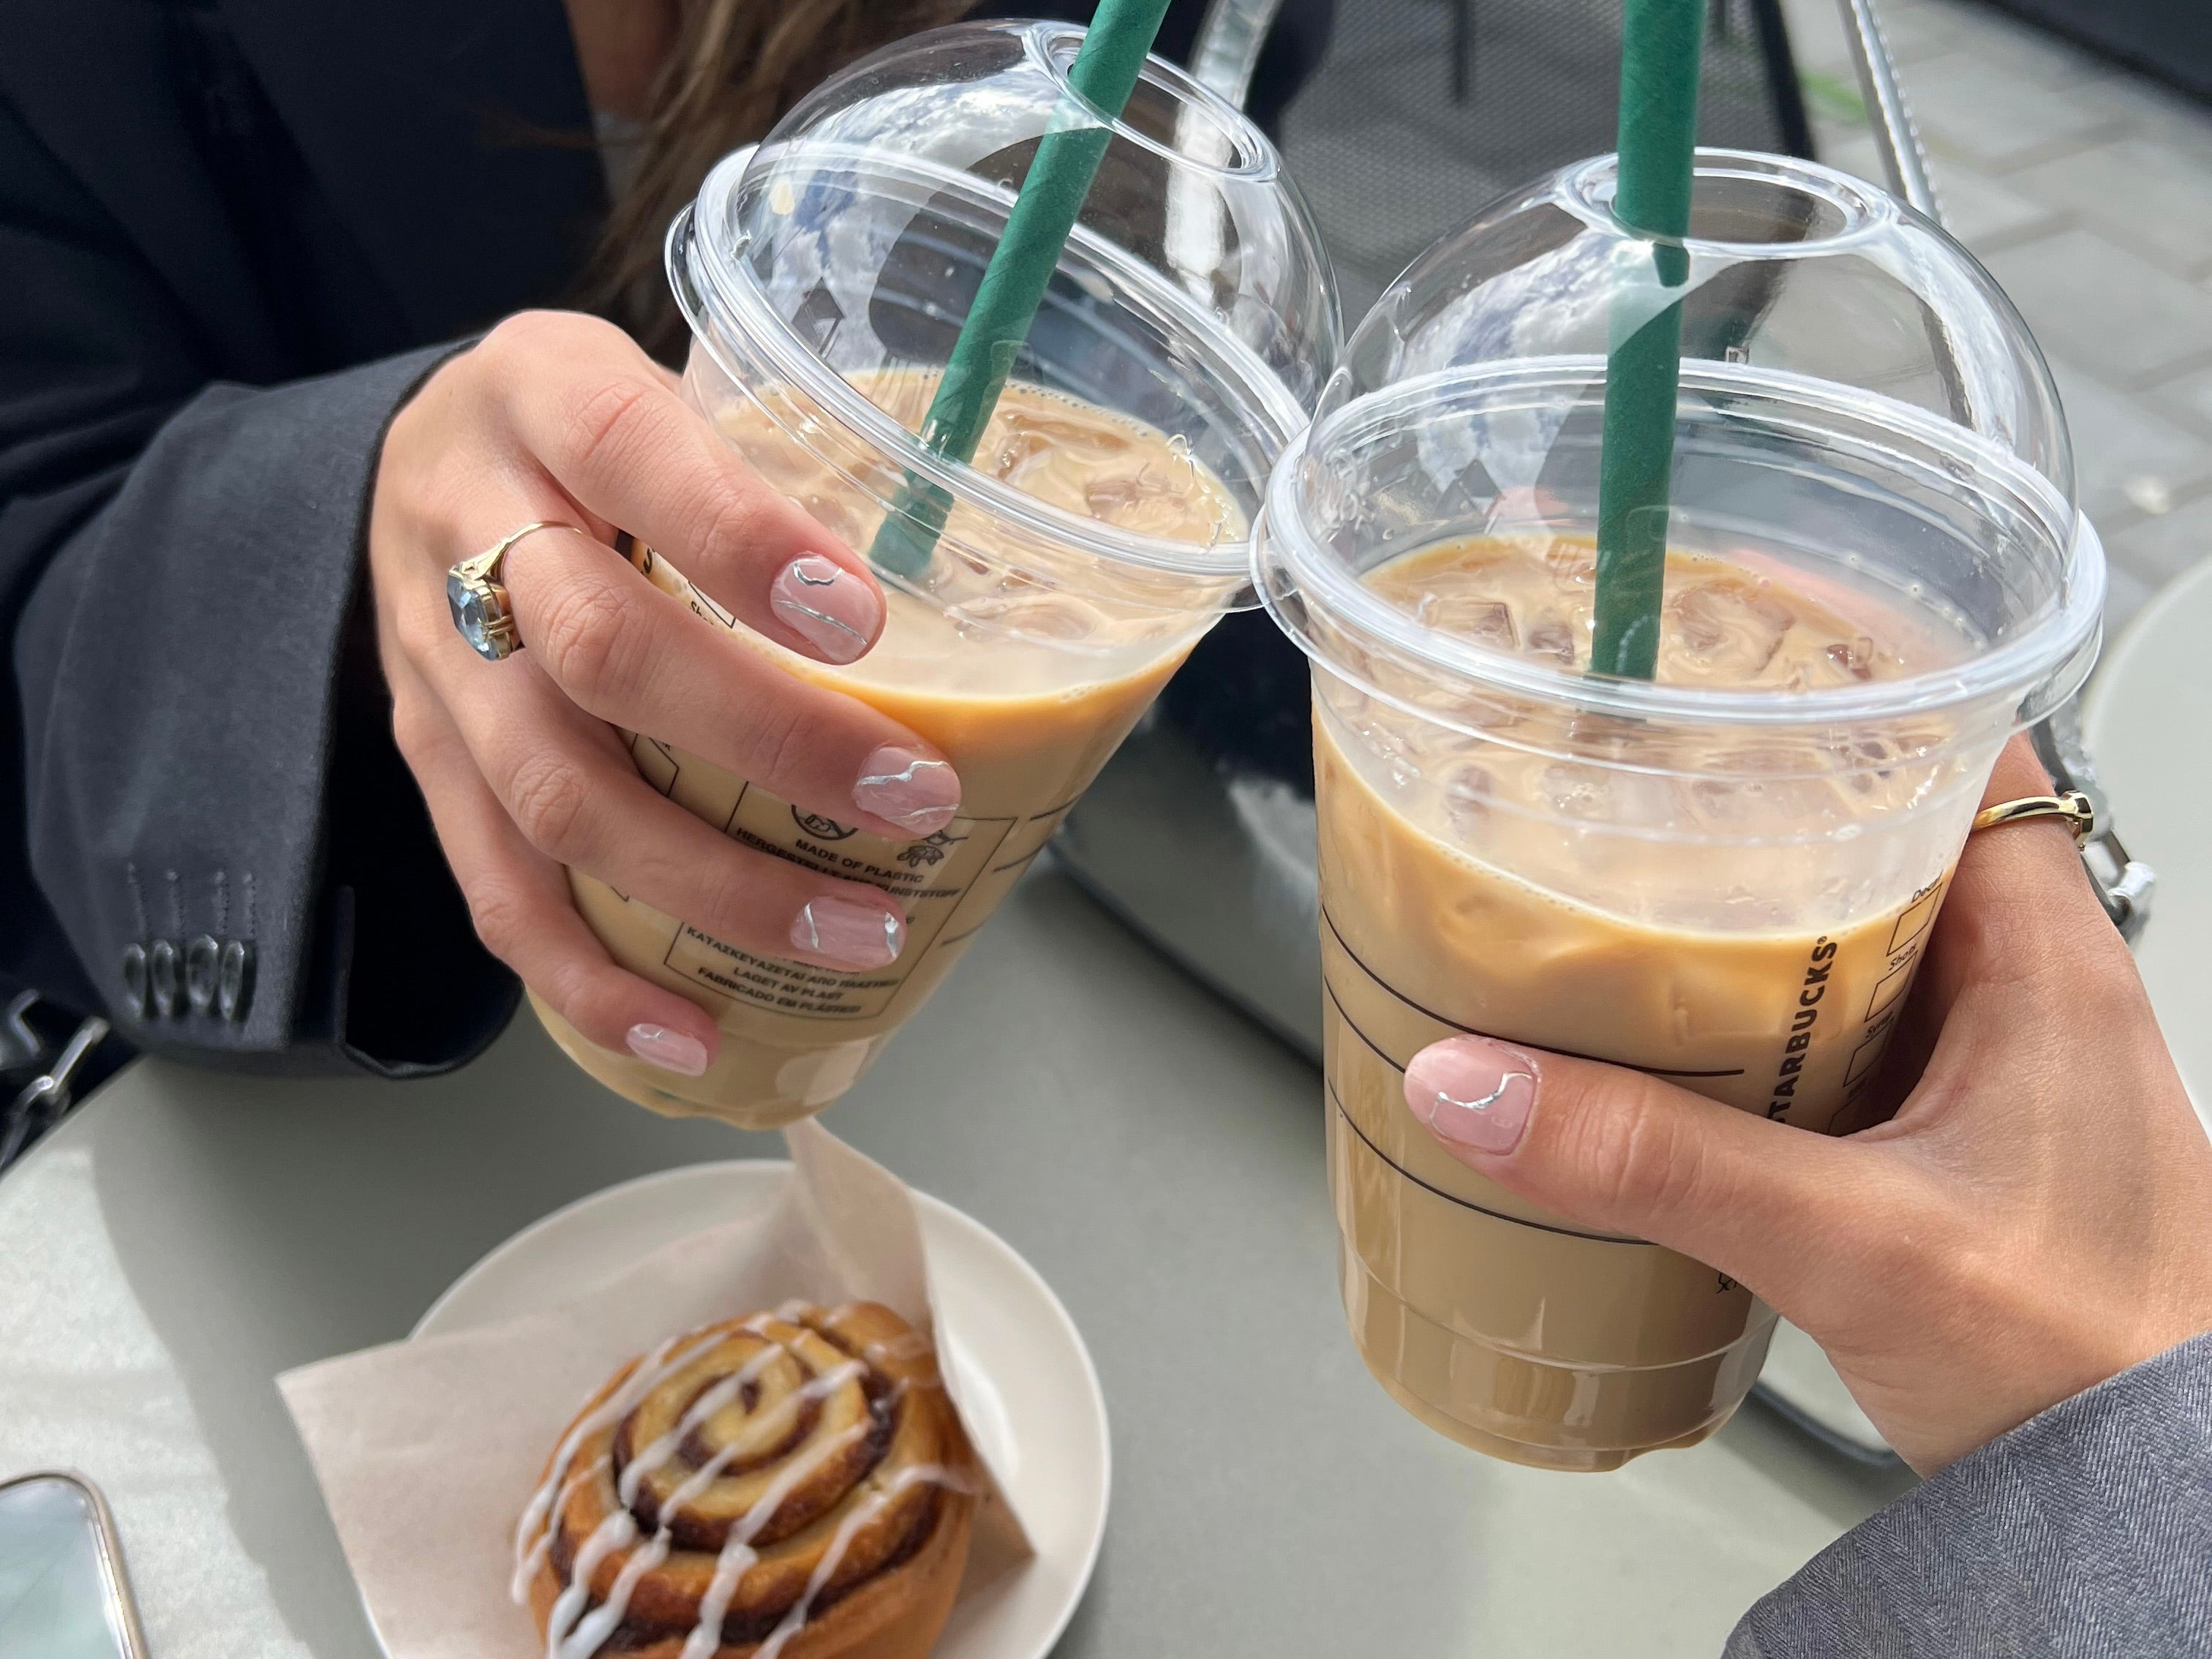 Two coffee cups cheersing with hands that are both wearing a Maniac gel manicure Silverlined Bliss Nina & Jelina maniac Nails Gellak Sticker Silver Nail Art Manicure